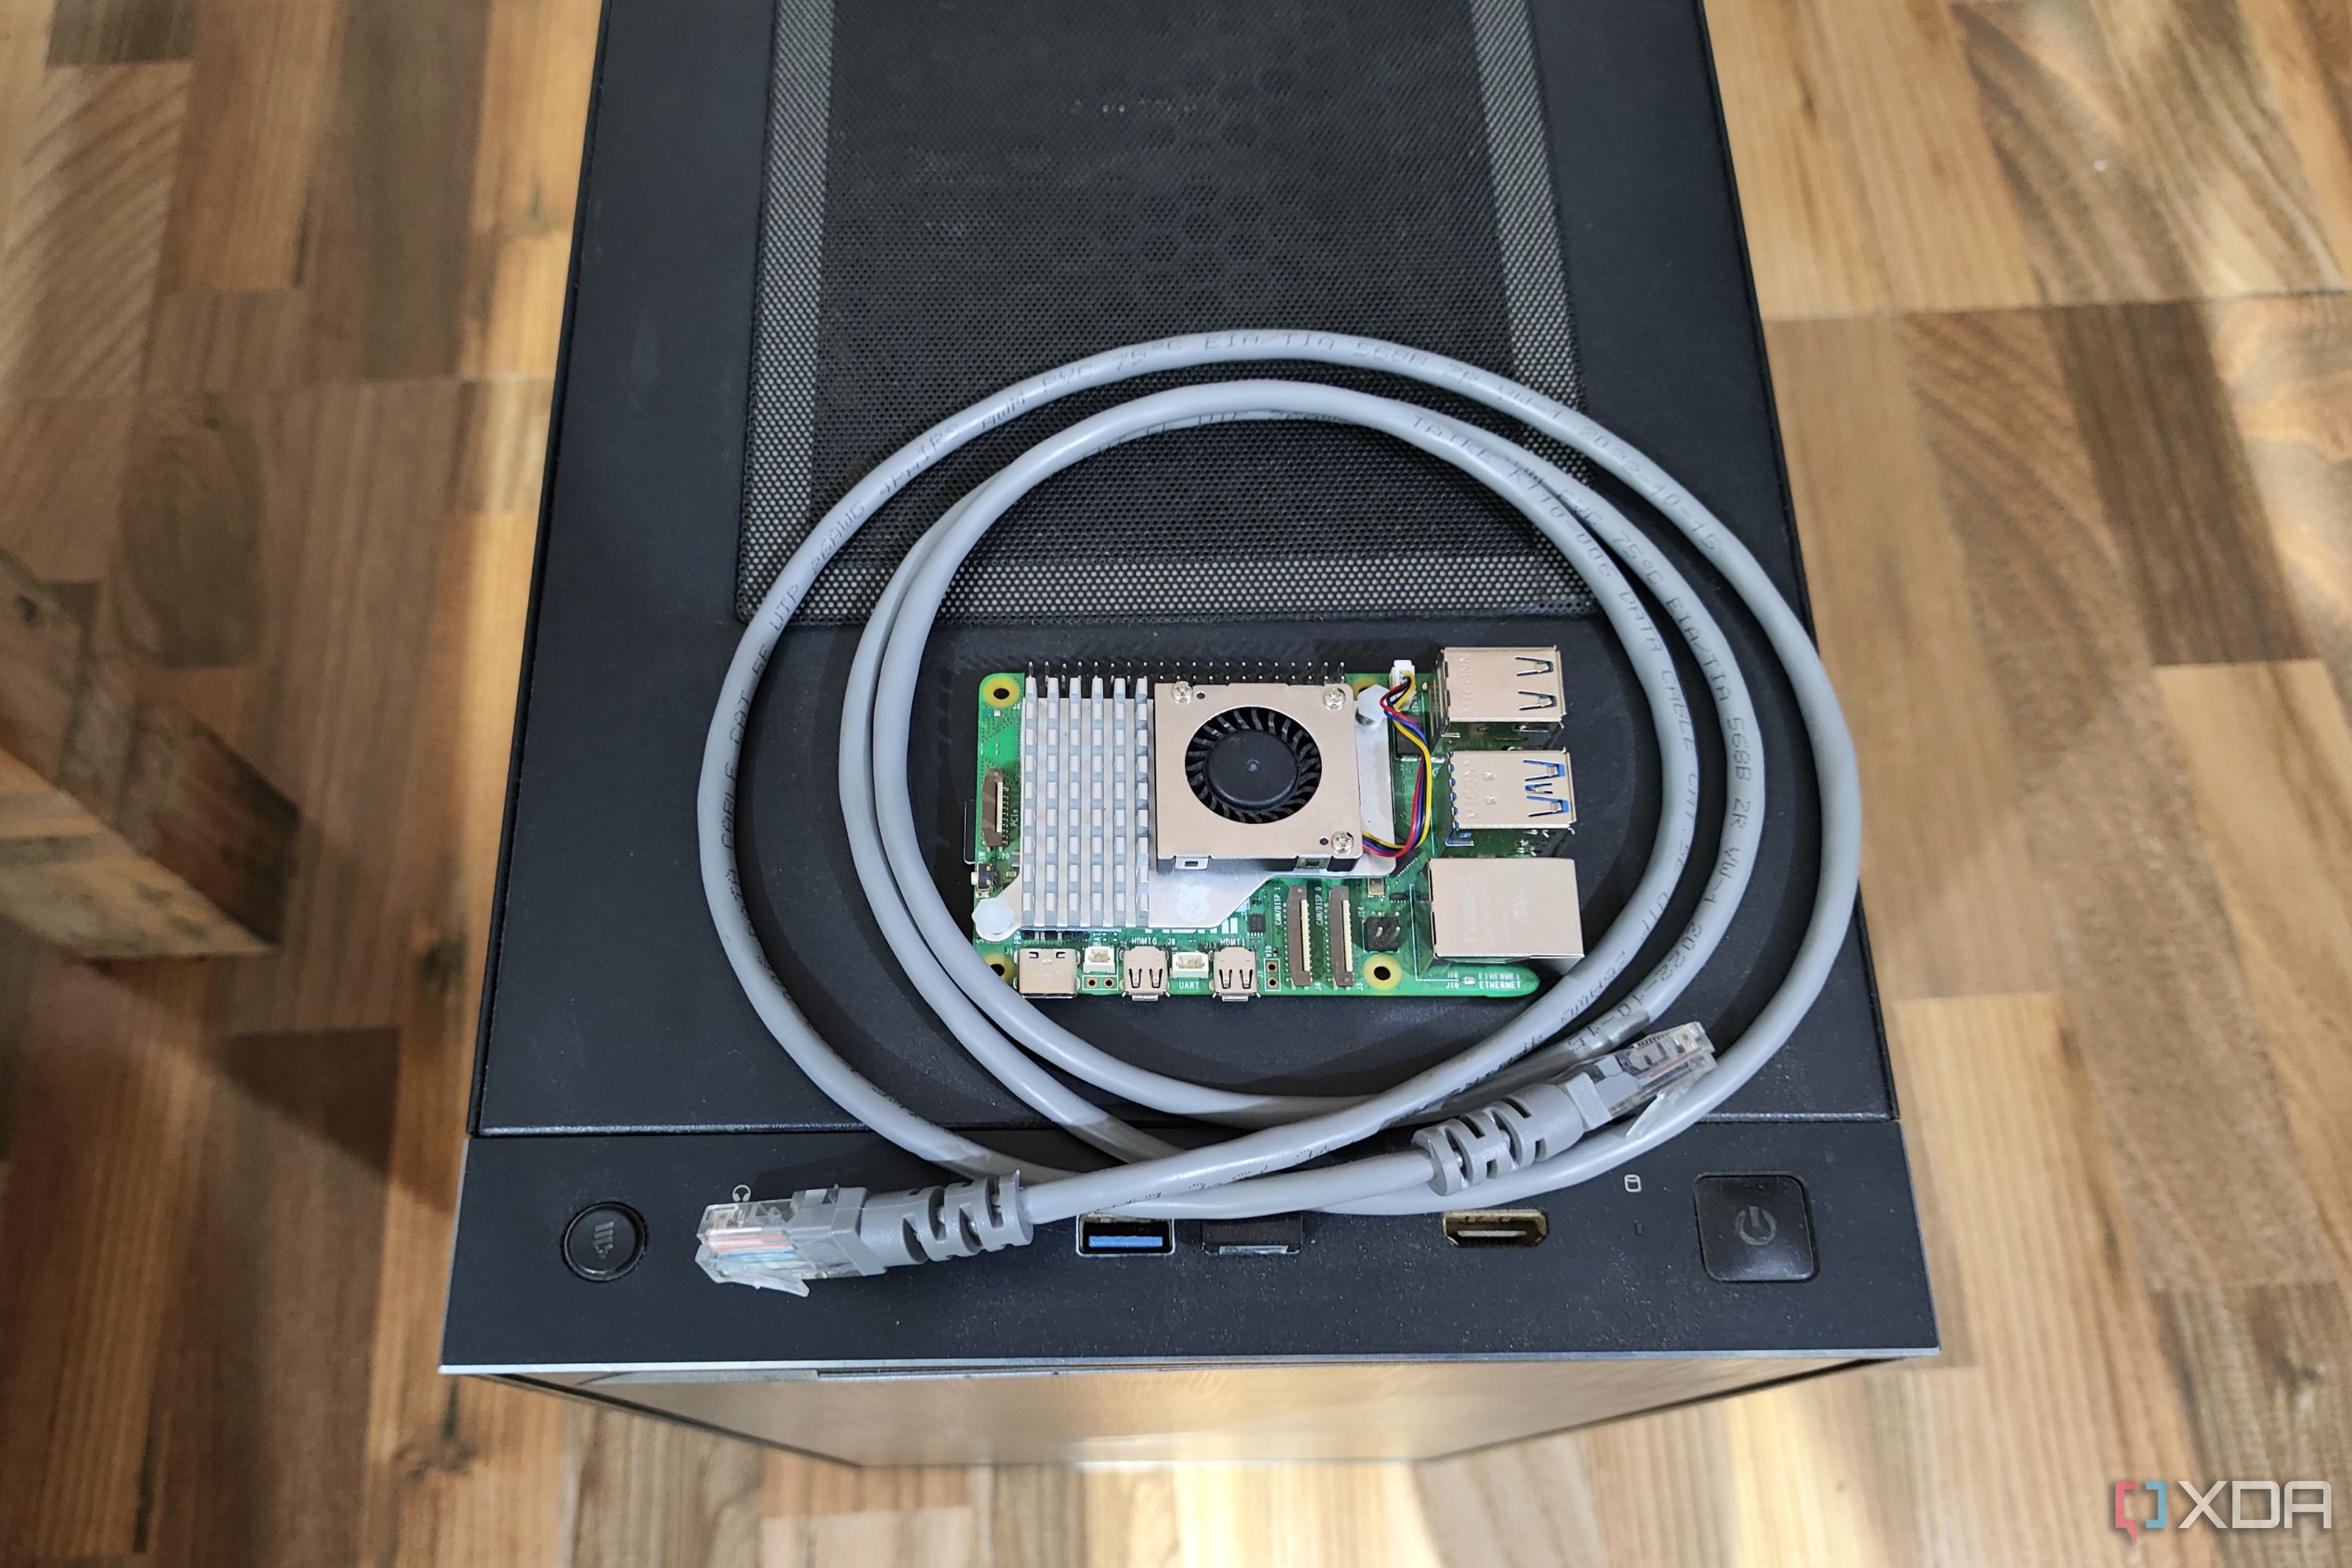 How to protect your home network with a Raspberry Pi firewall